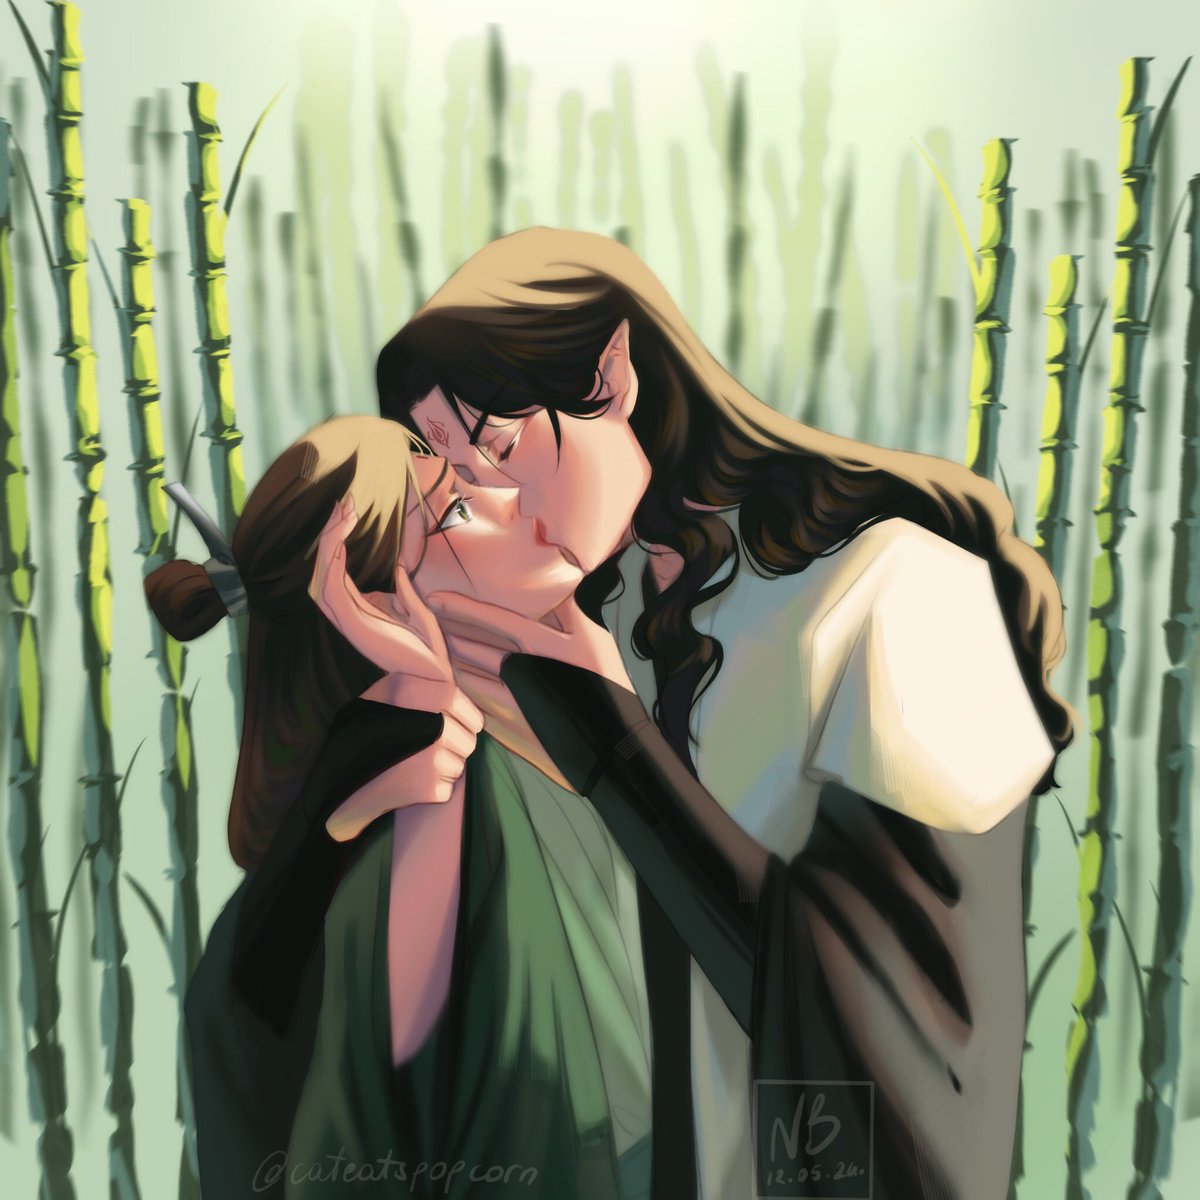 My 6th prompt for @SVSSSAction!! Thanks to kawouwu (tumblr) for donating. Here’s your “Bingqiu, anything”. Hope you like how I drew their first kiss😉